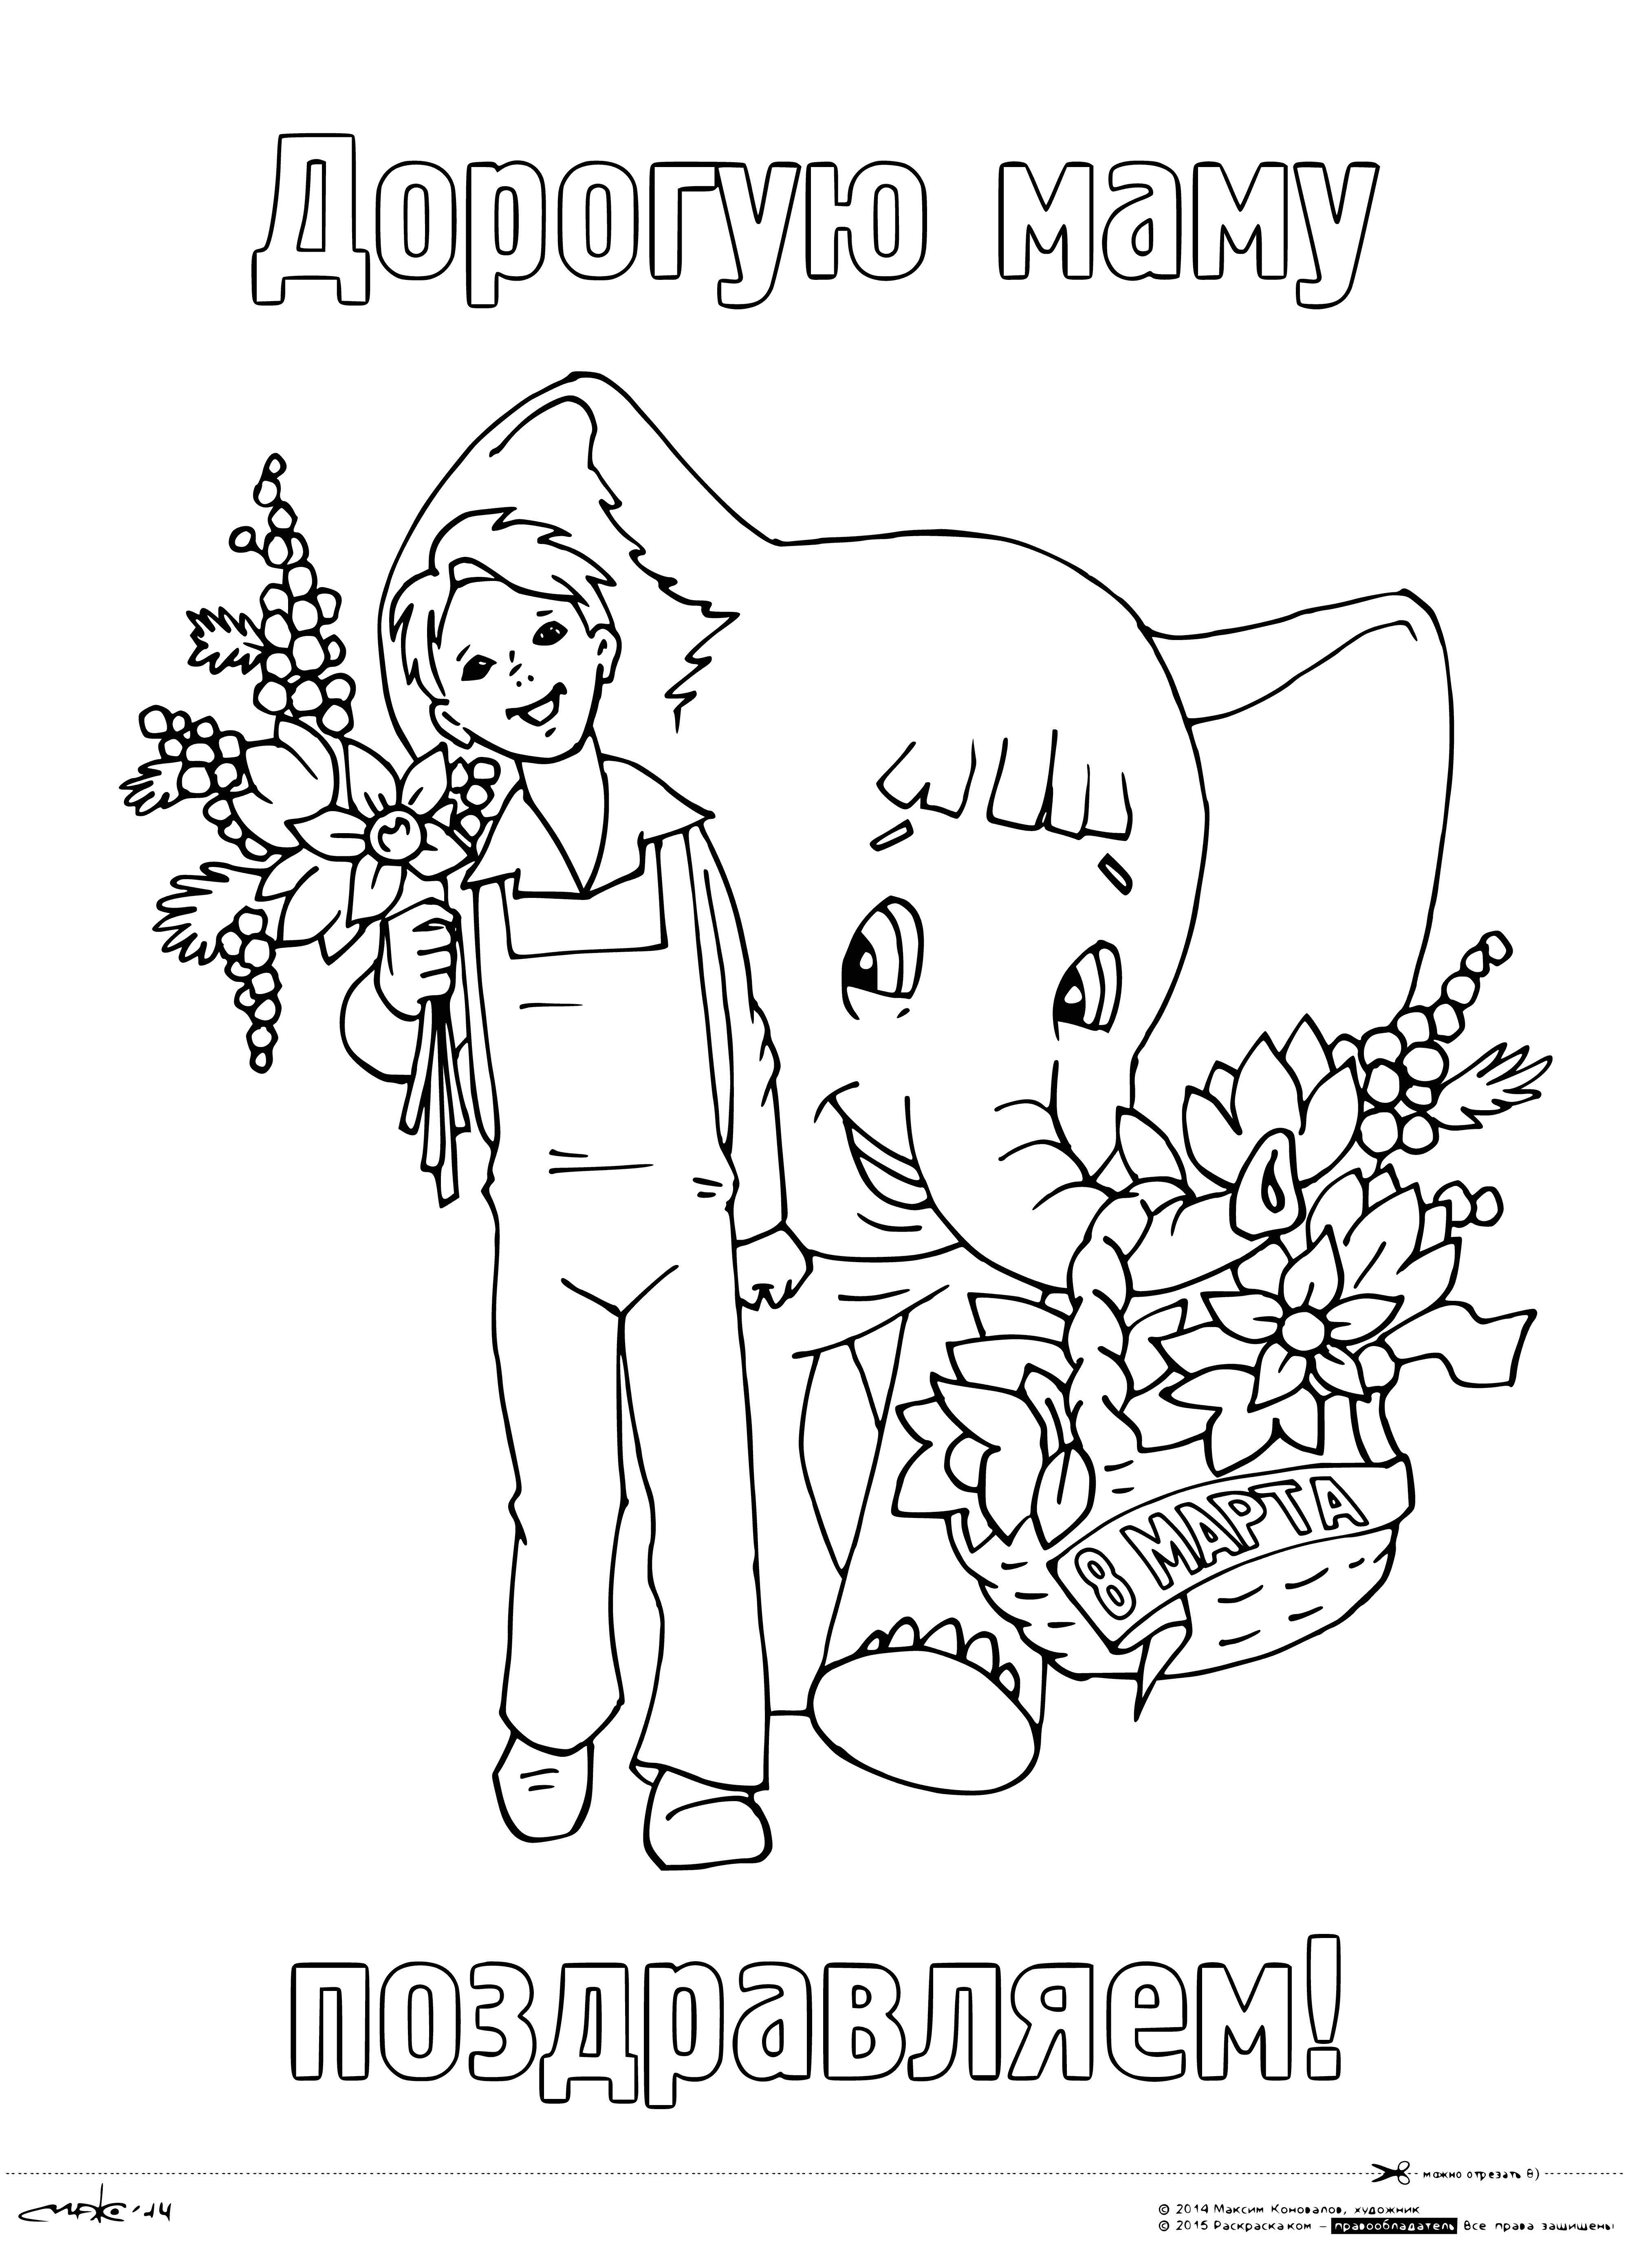 coloring page: Mother & daughter embrace, smiling with flowers & banner reading "Congratulations to dear mom!"